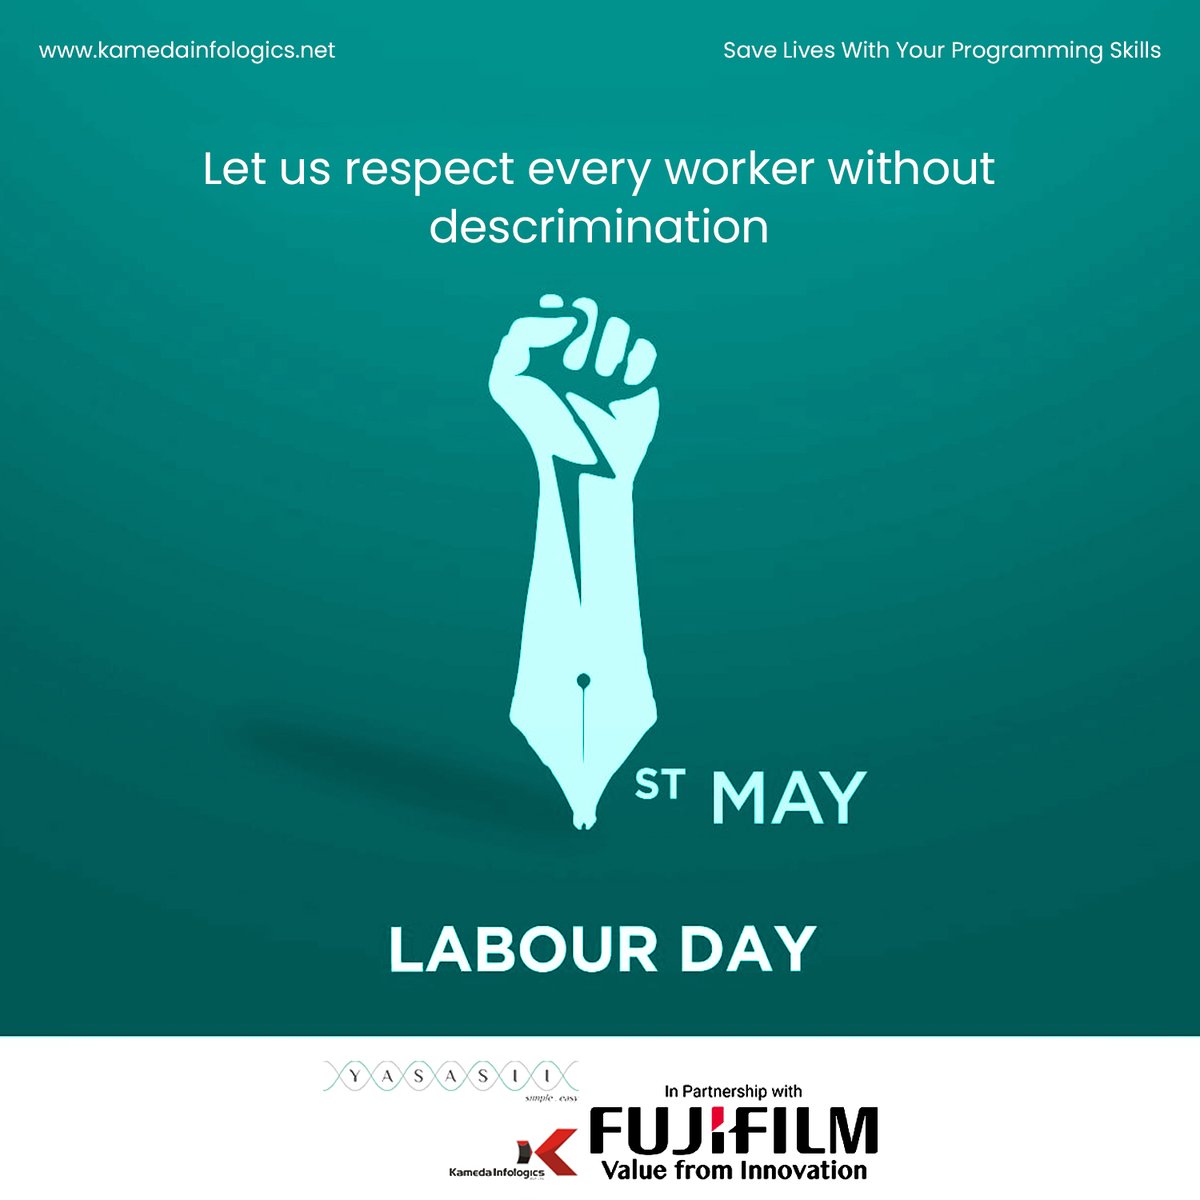 We pay tribute to the innumerable people whose perseverance and hard work have molded communities and advanced economies on this day. It's a time to take stock of the achievements gained in the fight for workers' rights and to recognize the obstacles left to overcome. #LabourDay